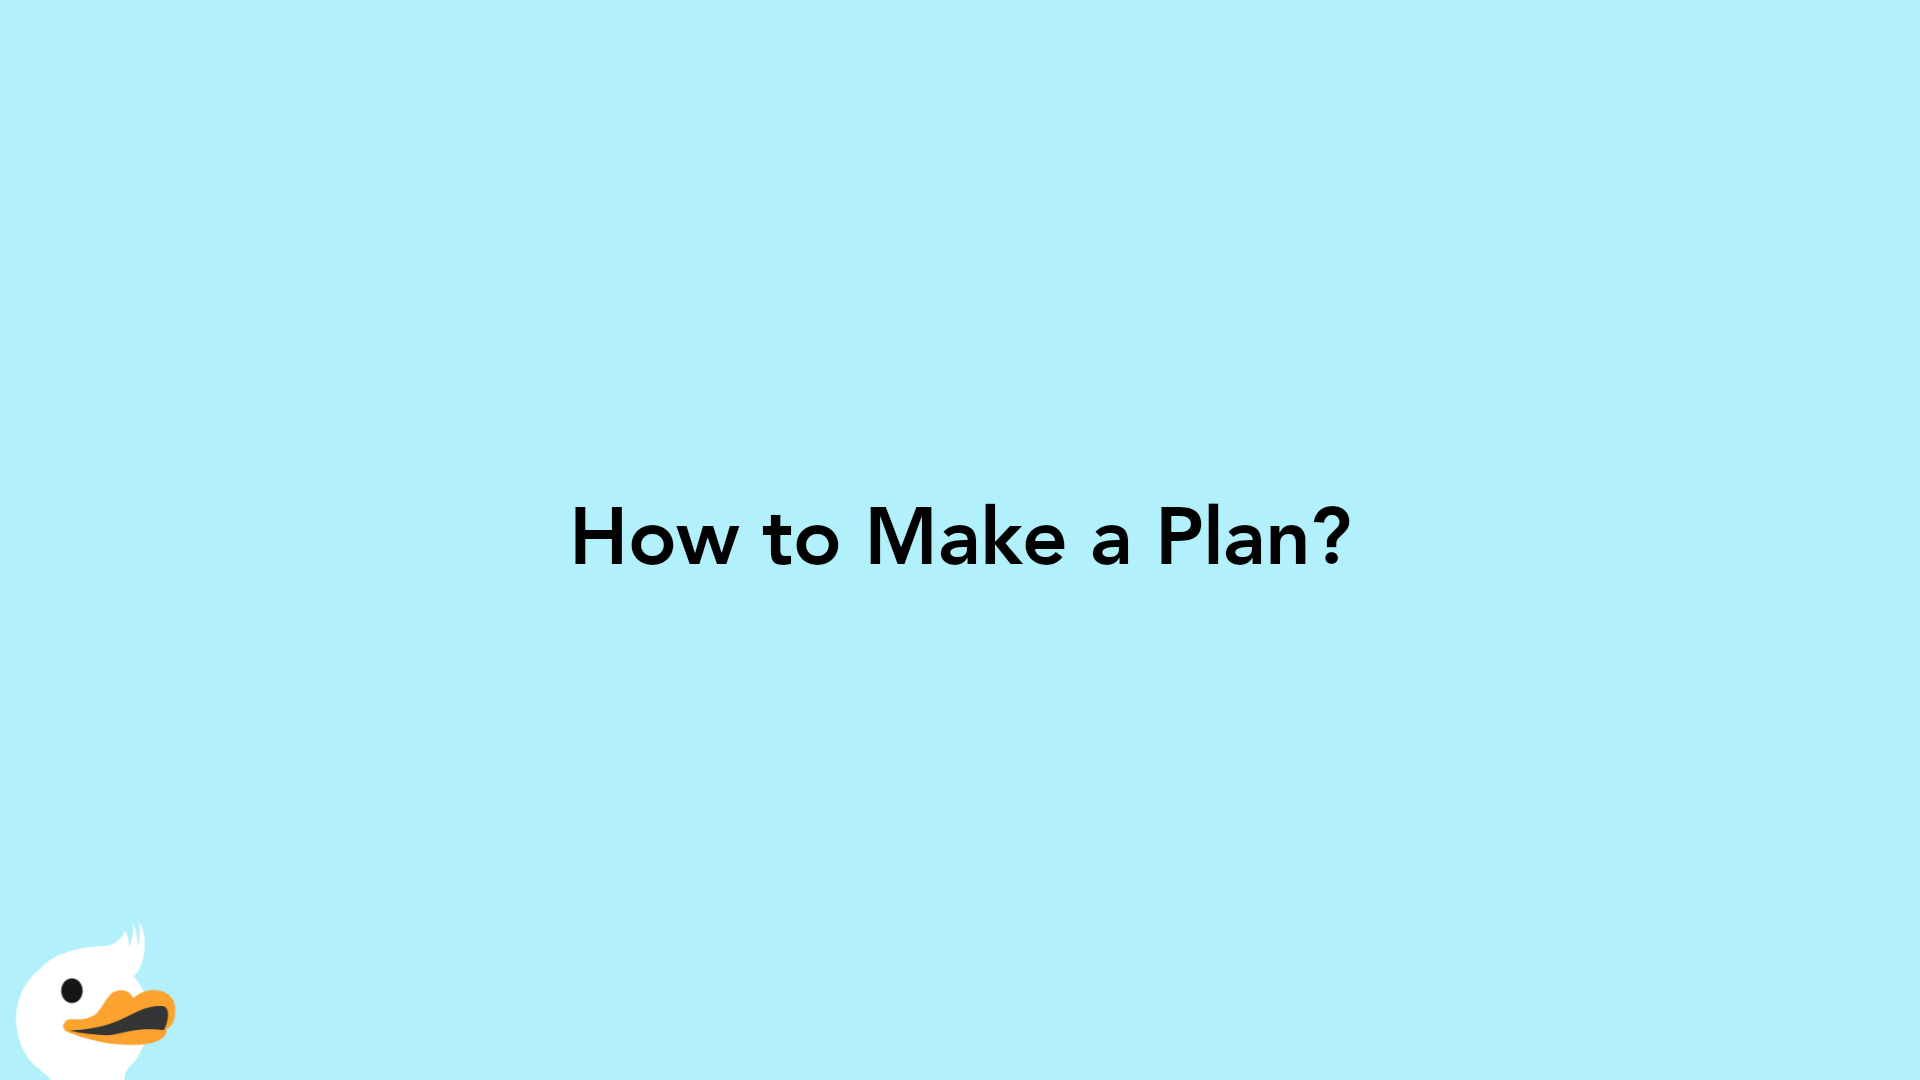 How to Make a Plan?